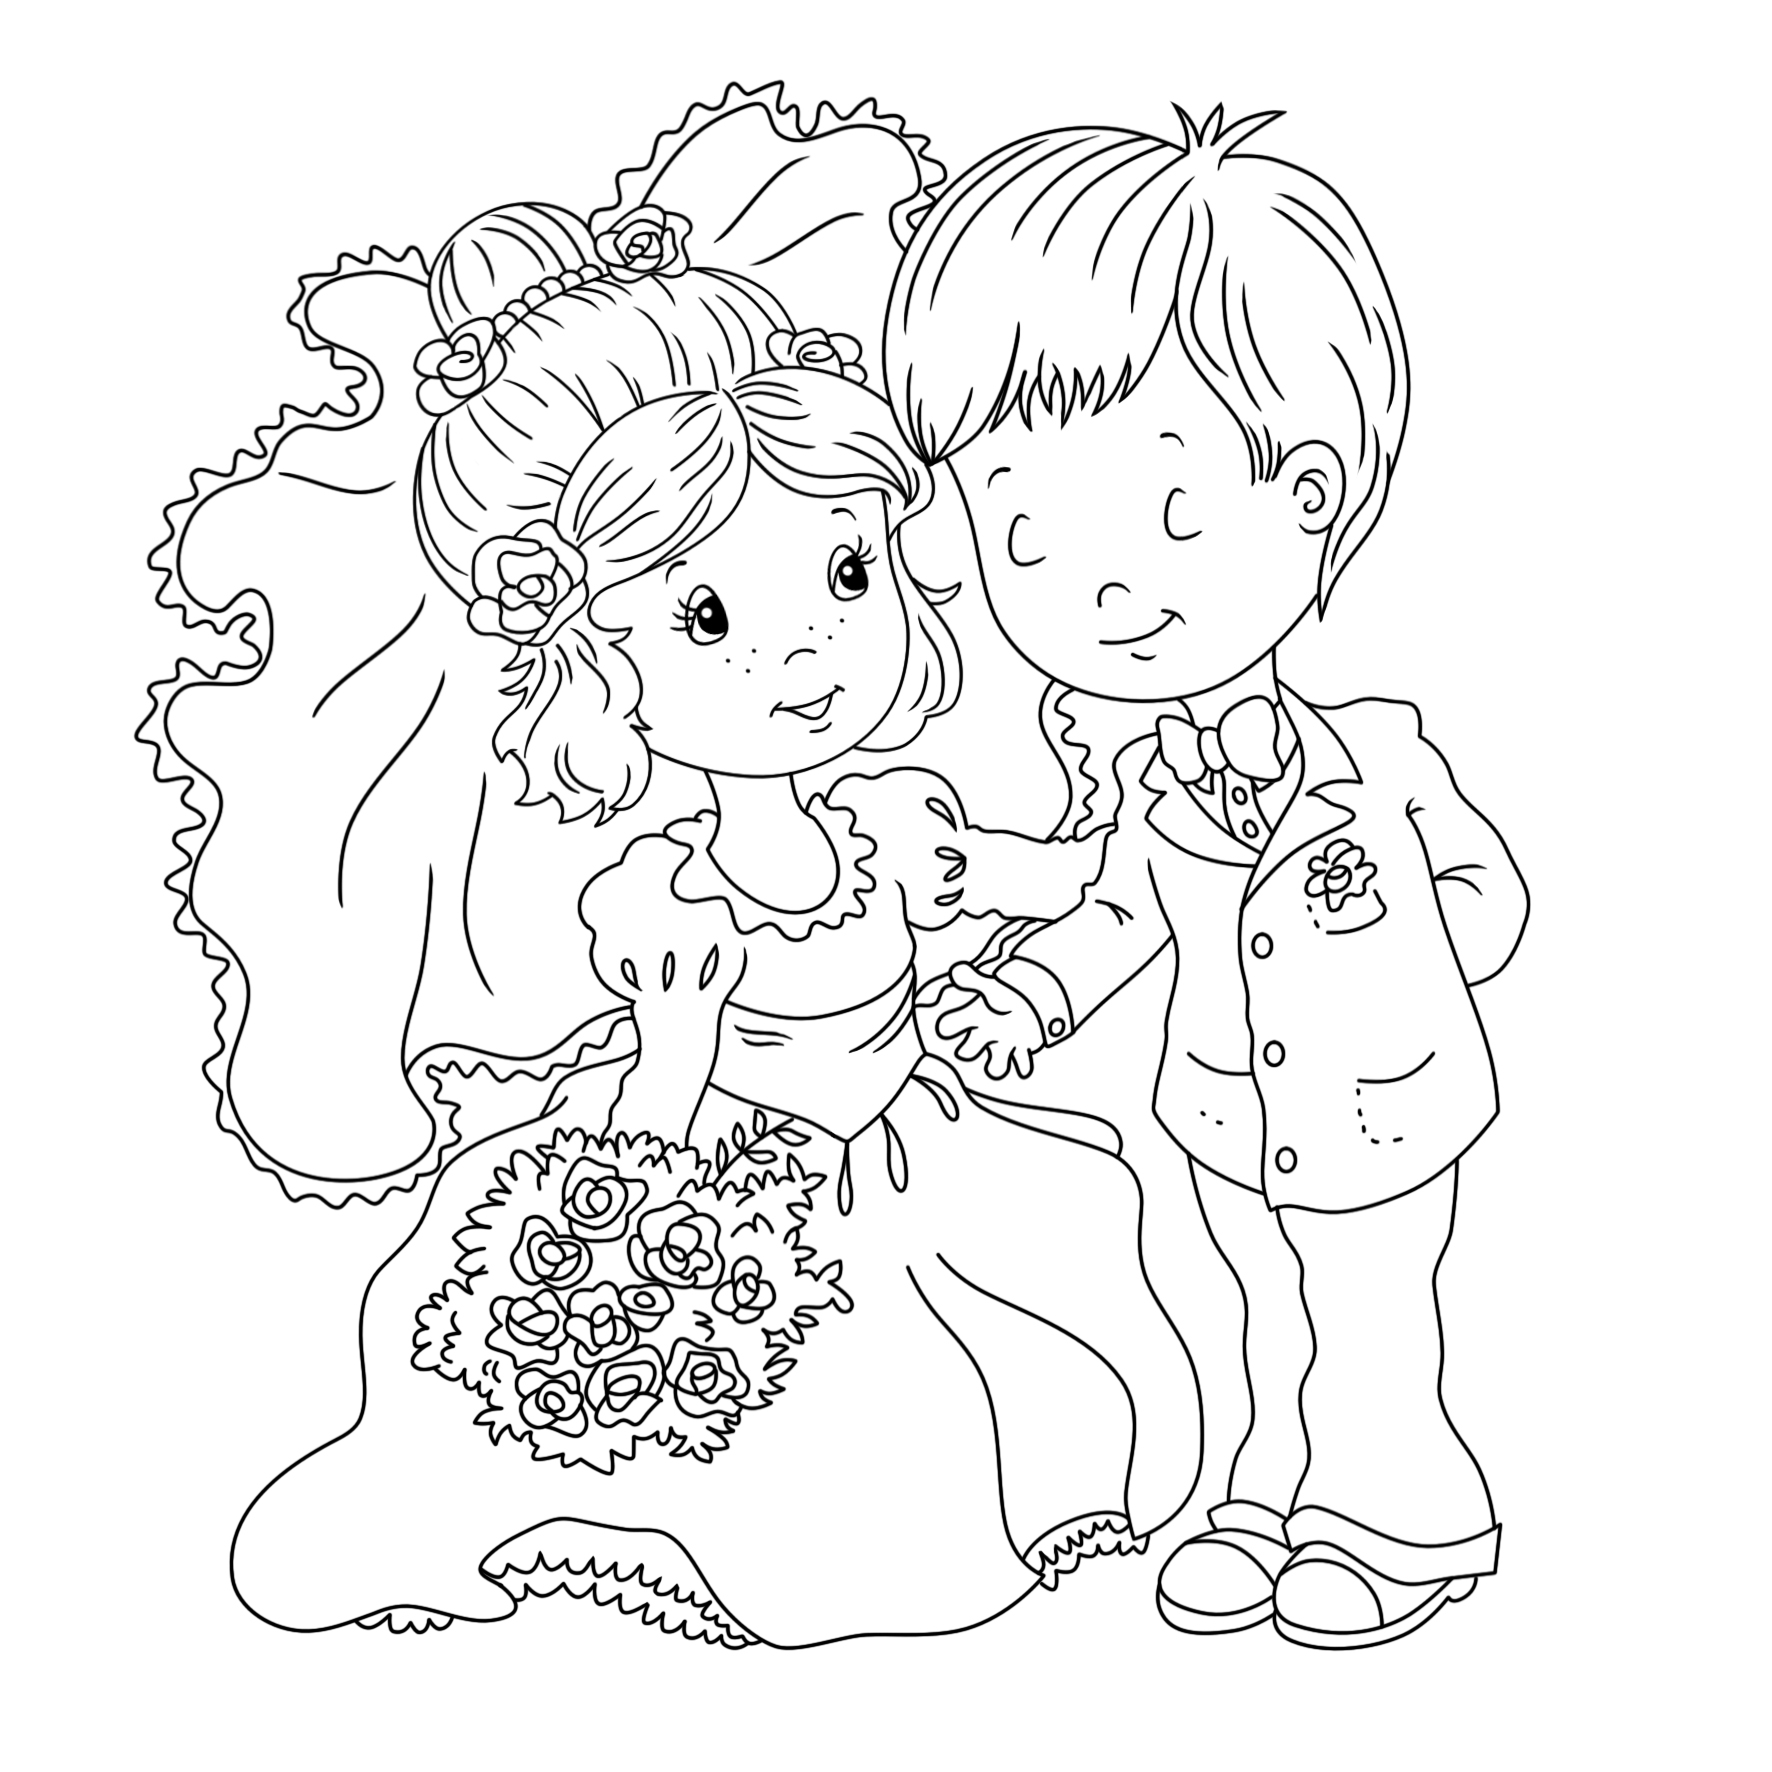 860 Cute Wedding Coloring Pages with Animal character